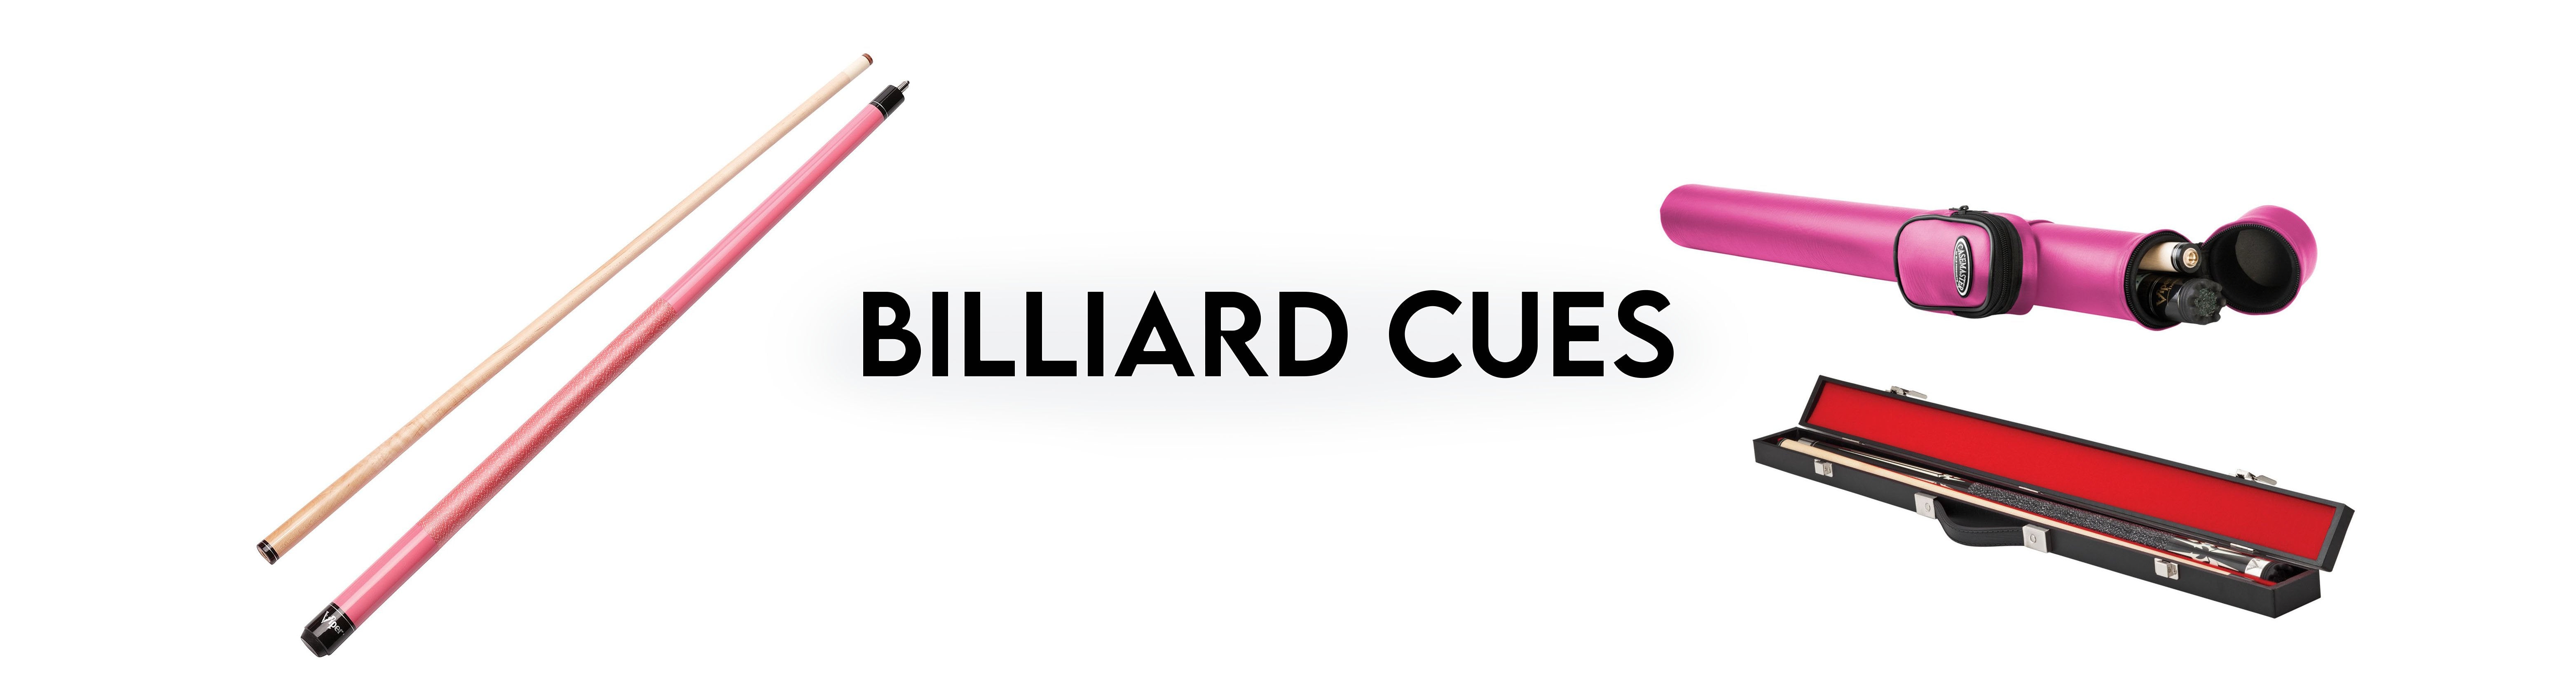 Billiard Cues - Recreation Outfitters